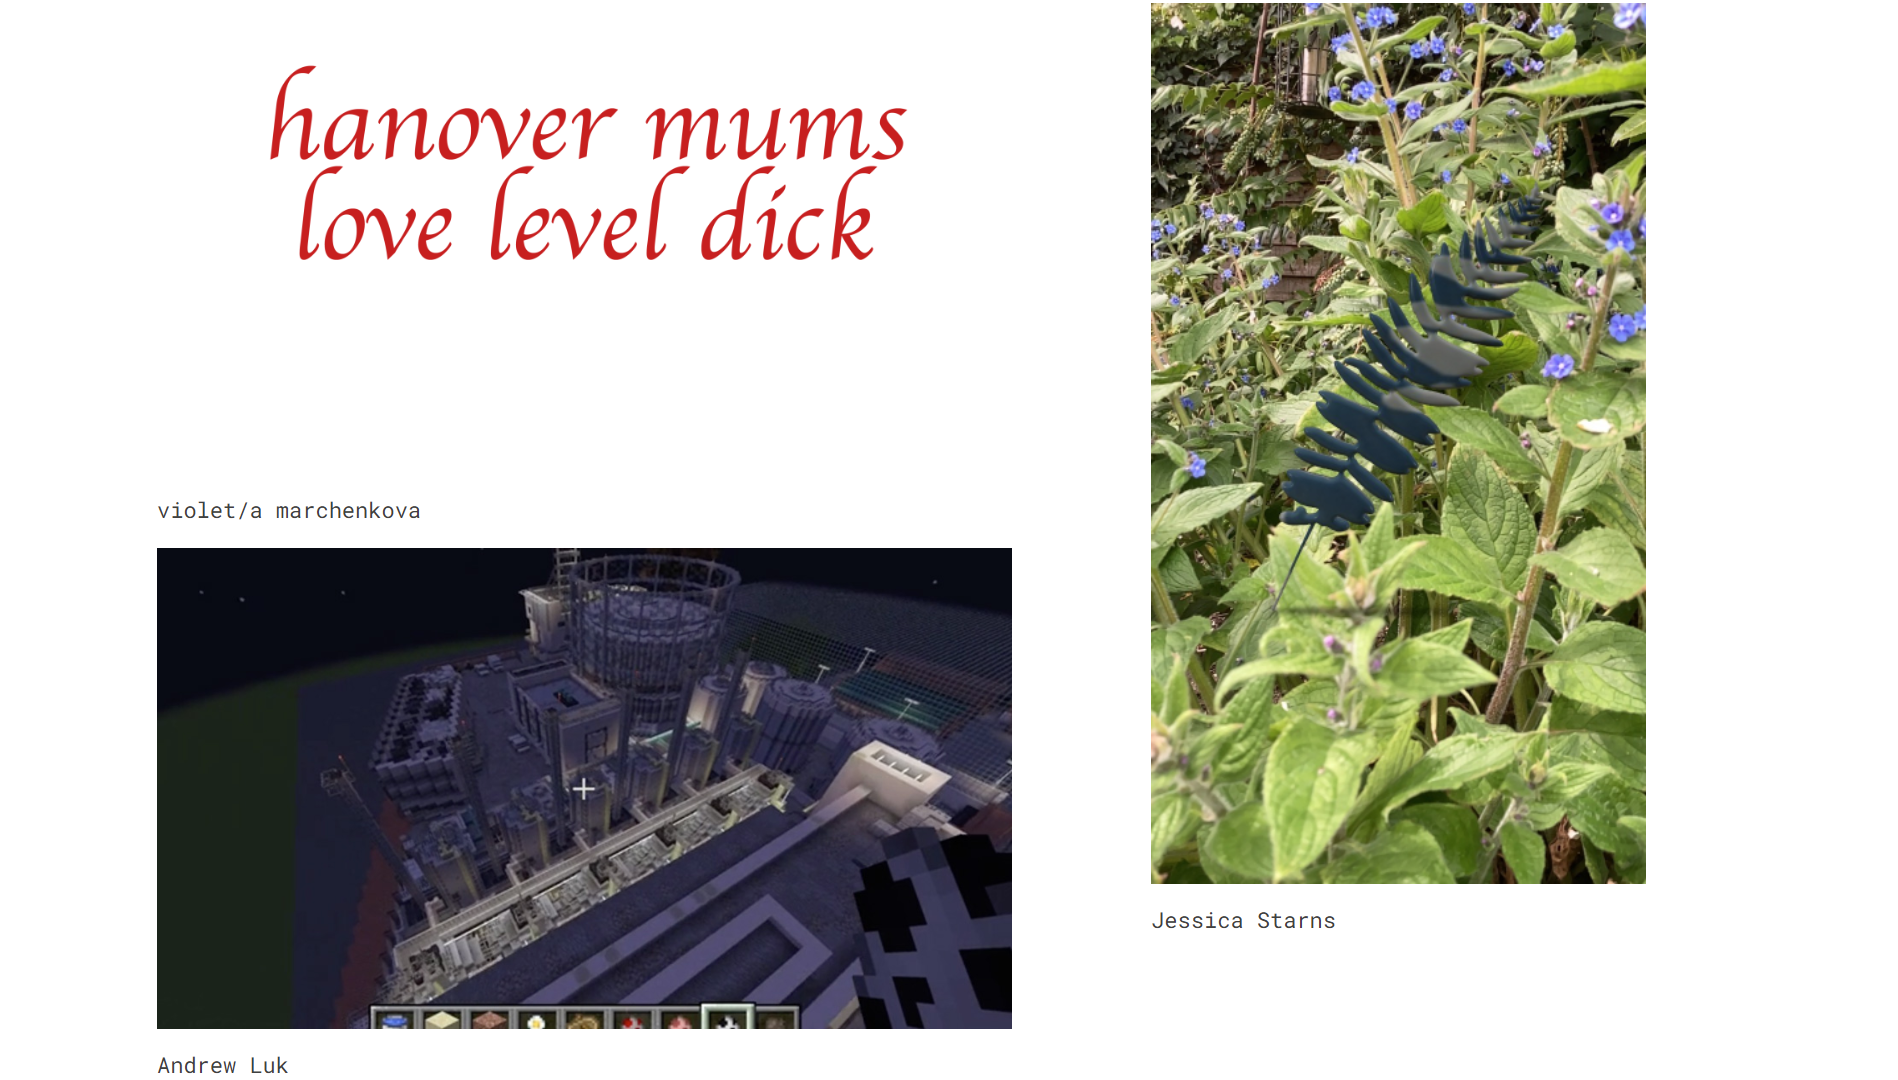 3 artists' work from Vital Capacities are represented - in the left corner text says hanover mums love level dick in red font - created by violet marchenkova, on the right Jess Starns' work is an AR image of a fern over a natural garden landscape, on the bottom left is Andrew Luk's work, a still image captured from Minecraft